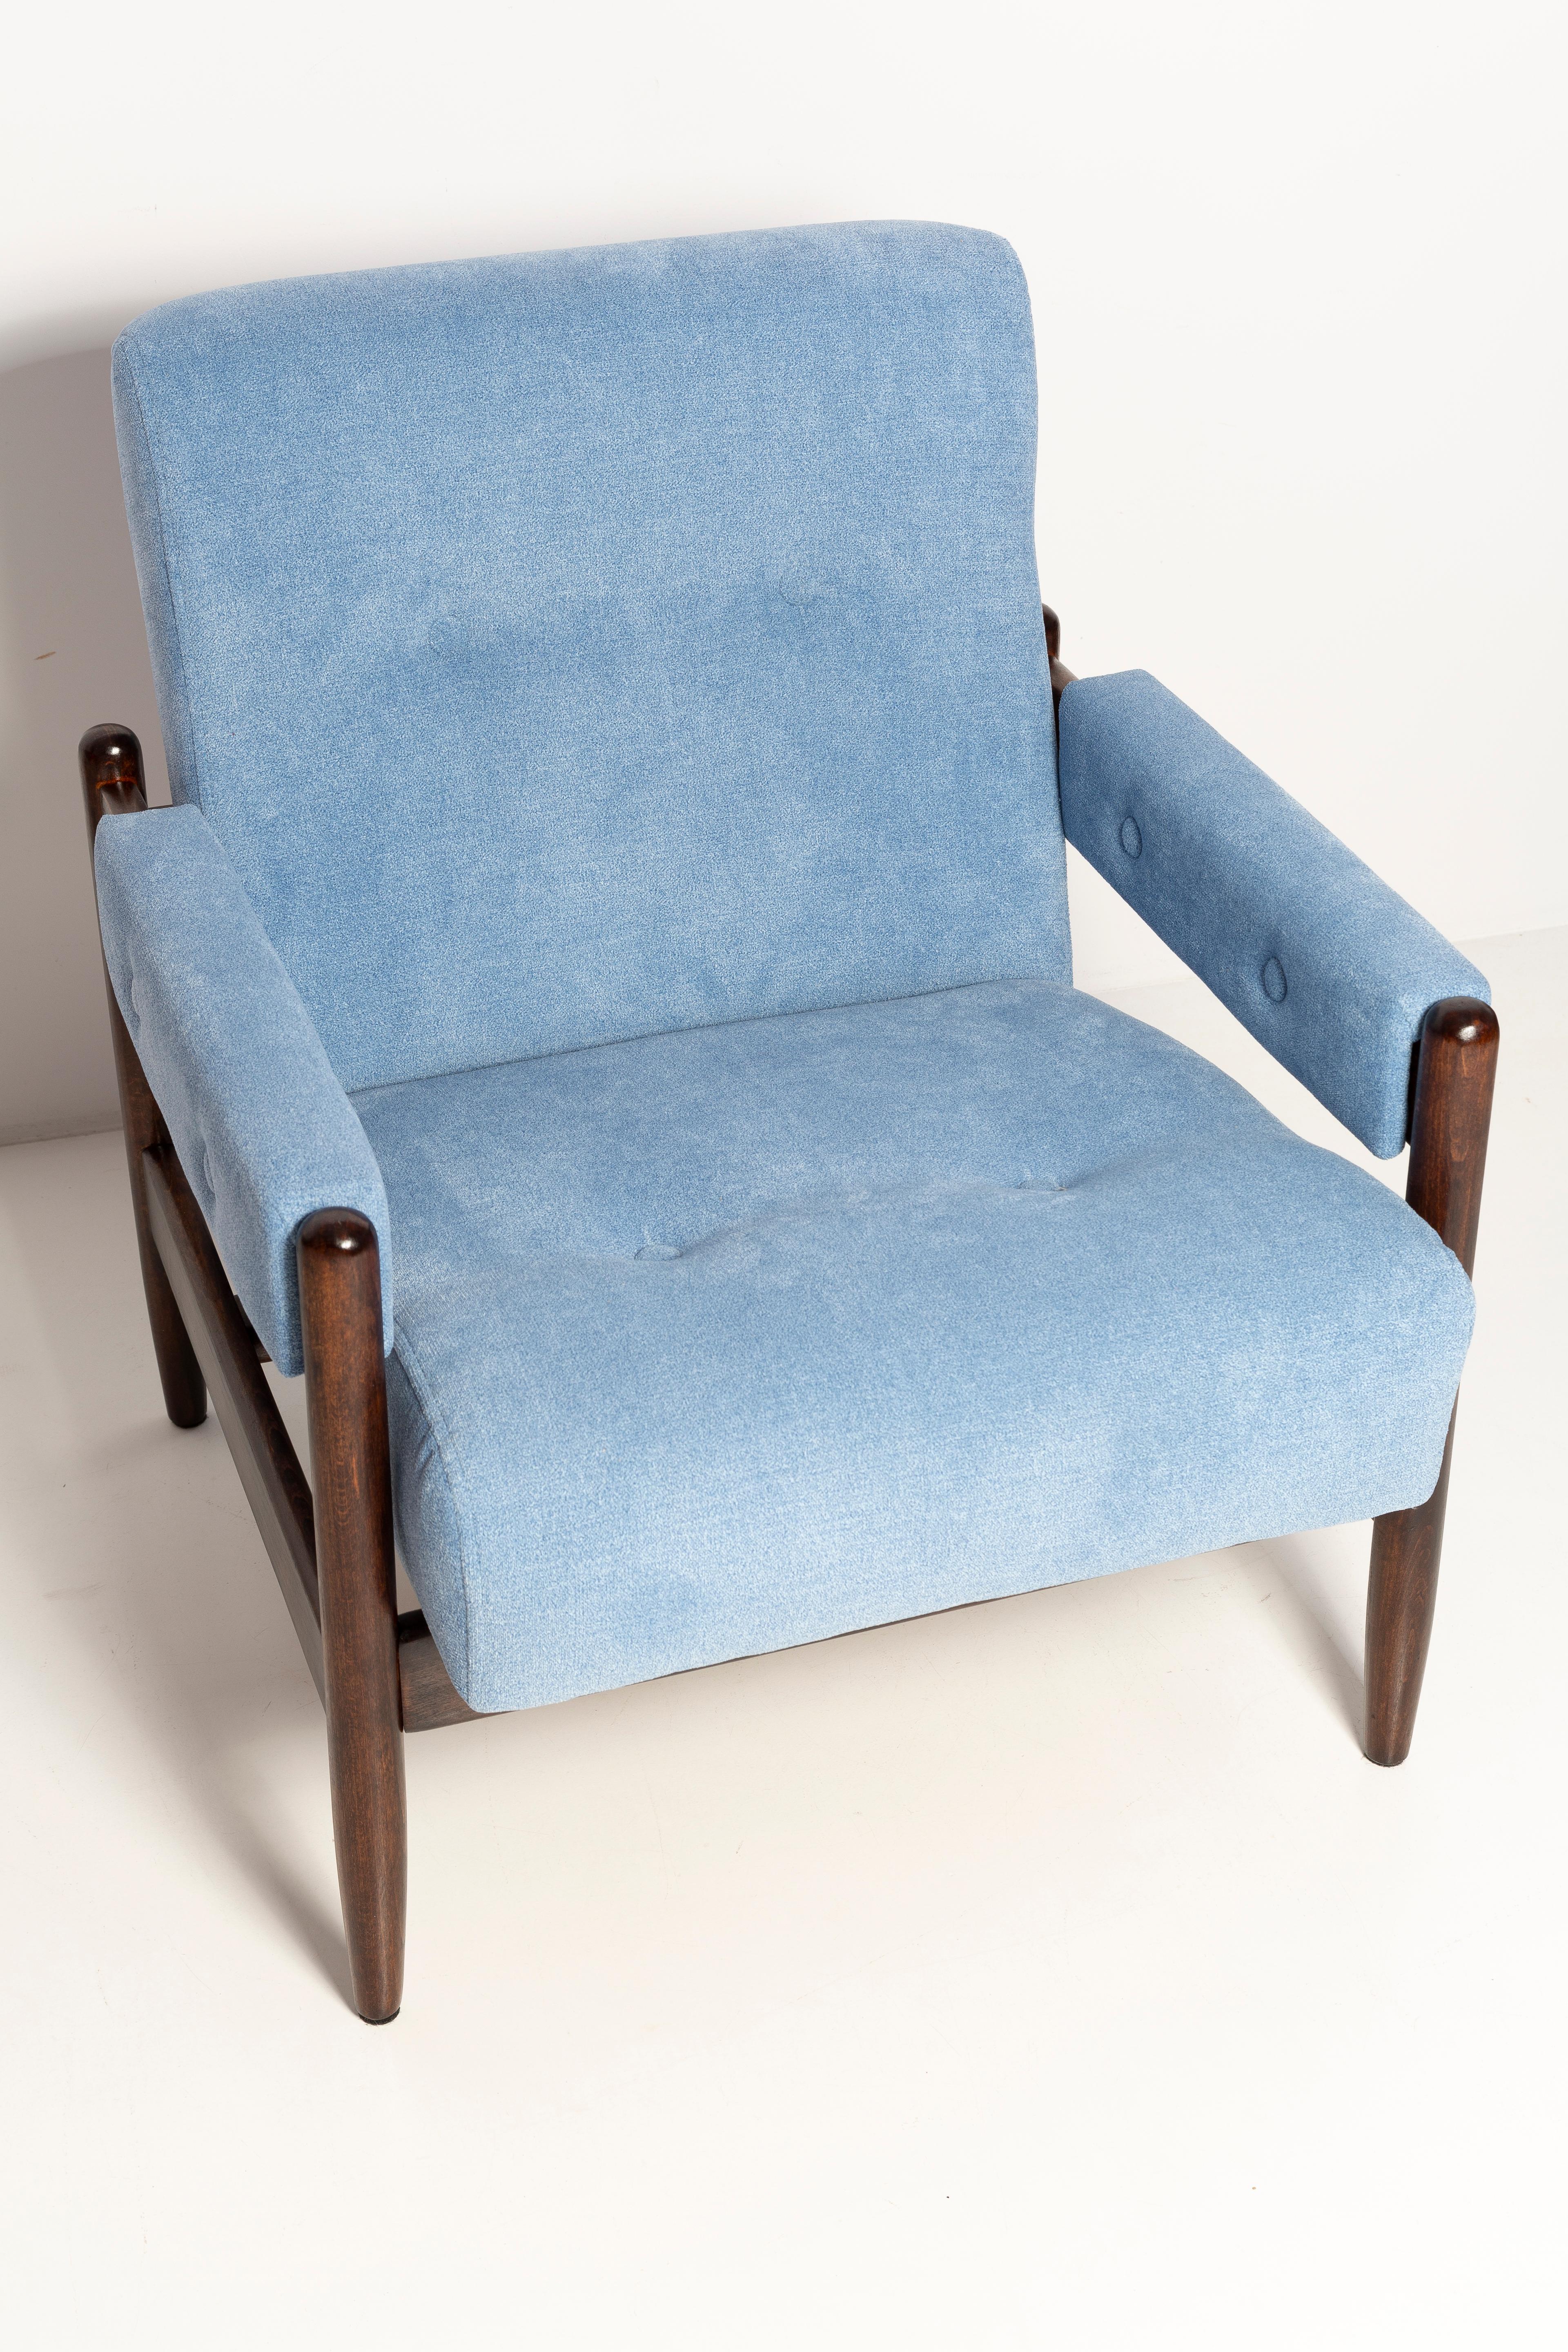 20th Century Set of Two Mid Century Blue Velvet Vintage Armchairs, Walnut Wood, Europe, 1960s For Sale